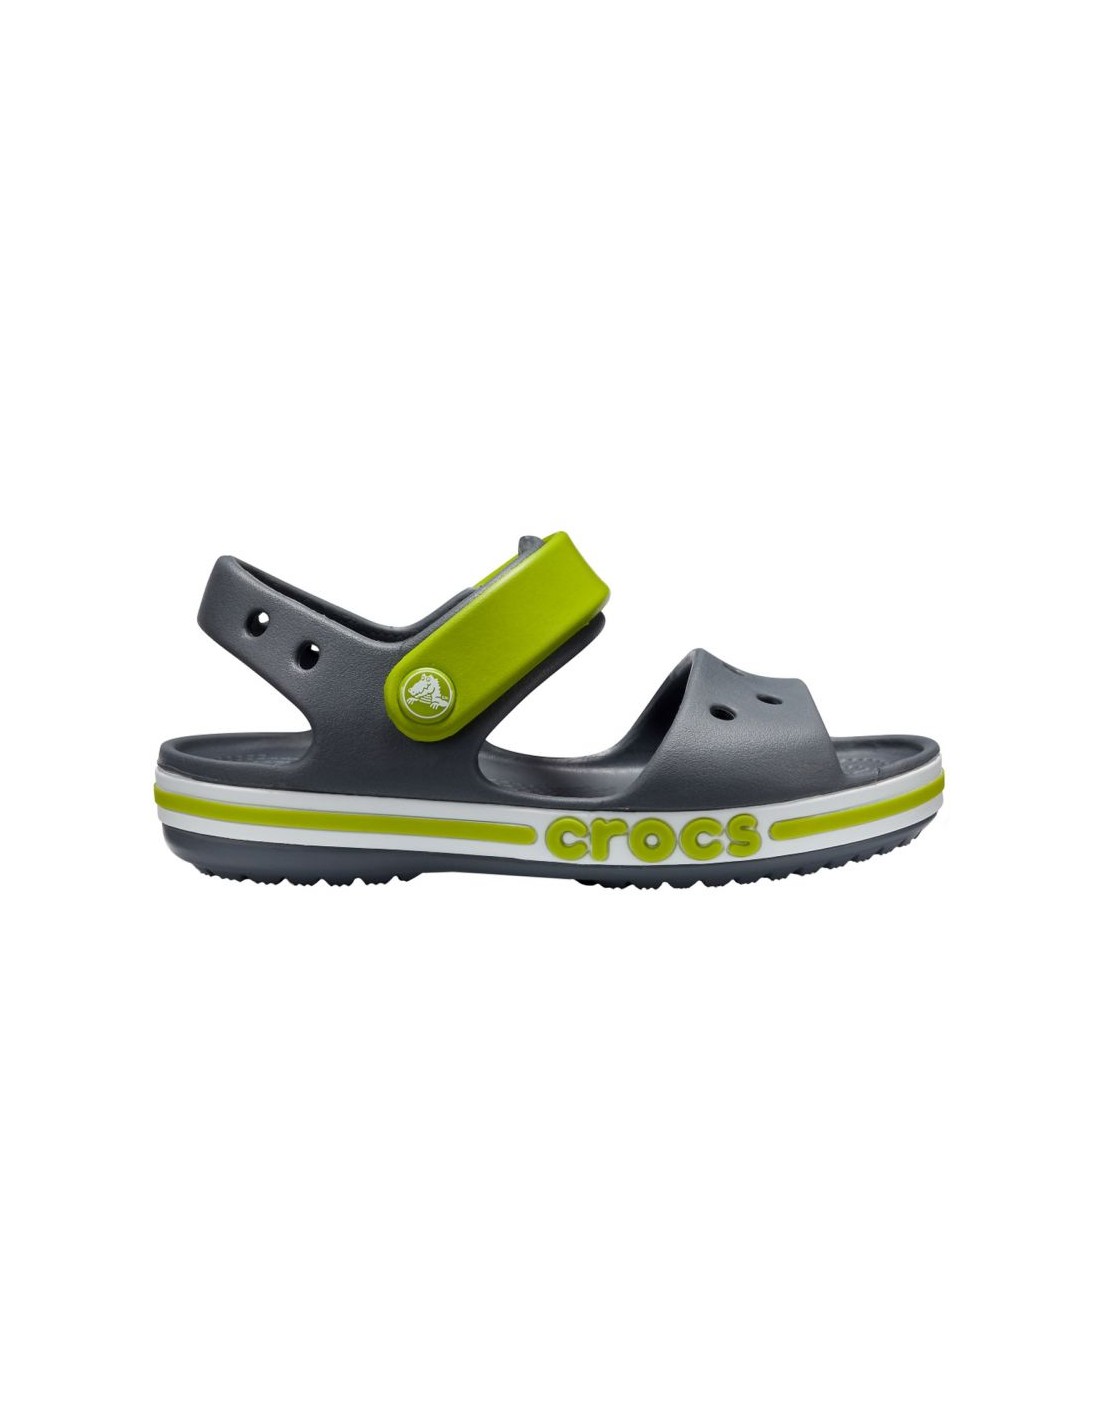 Summer Unisex Crocs Crocband & Bayaband Clogs Shoes Slippers with Extra  Comfort, Lightweight Cushioning for Outdoor